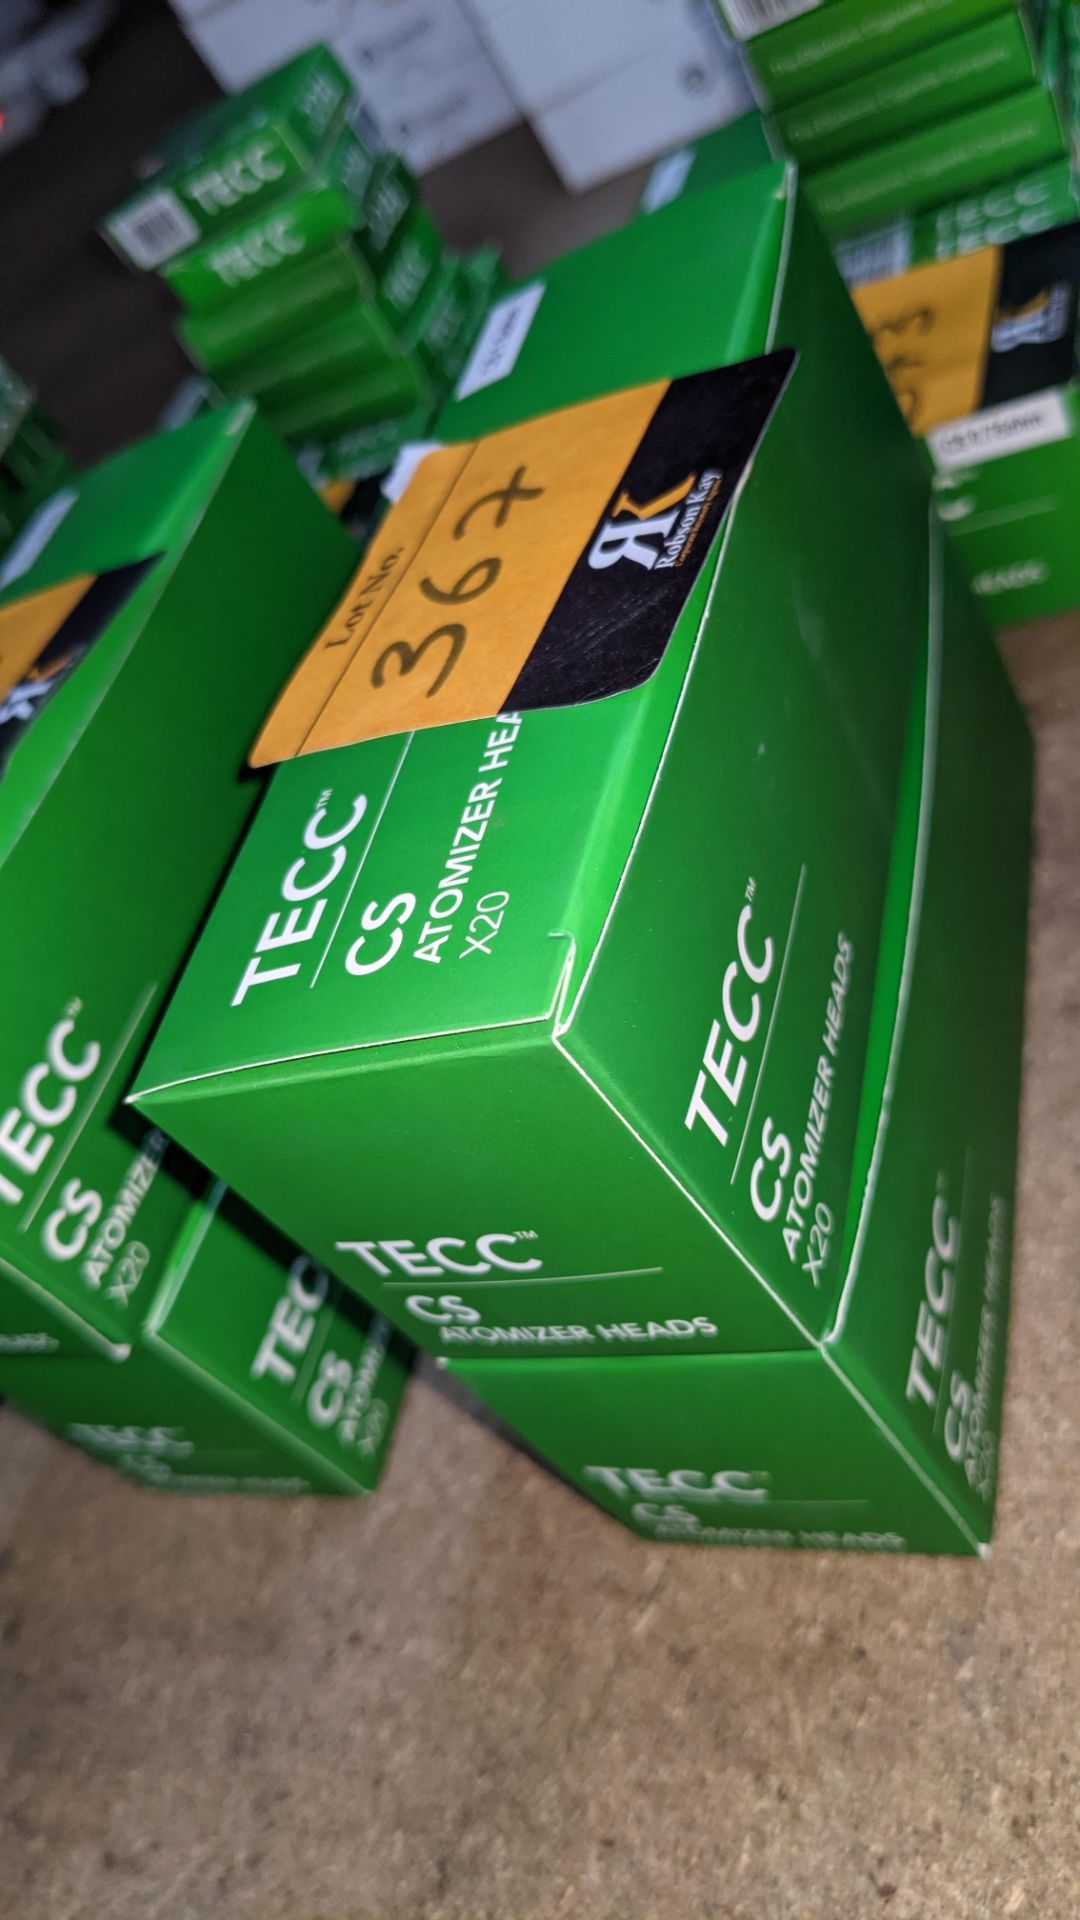 22 off TECC CS atomizer head twin packs (22 packs each containing 2 heads). 1.5ohm - Image 4 of 4